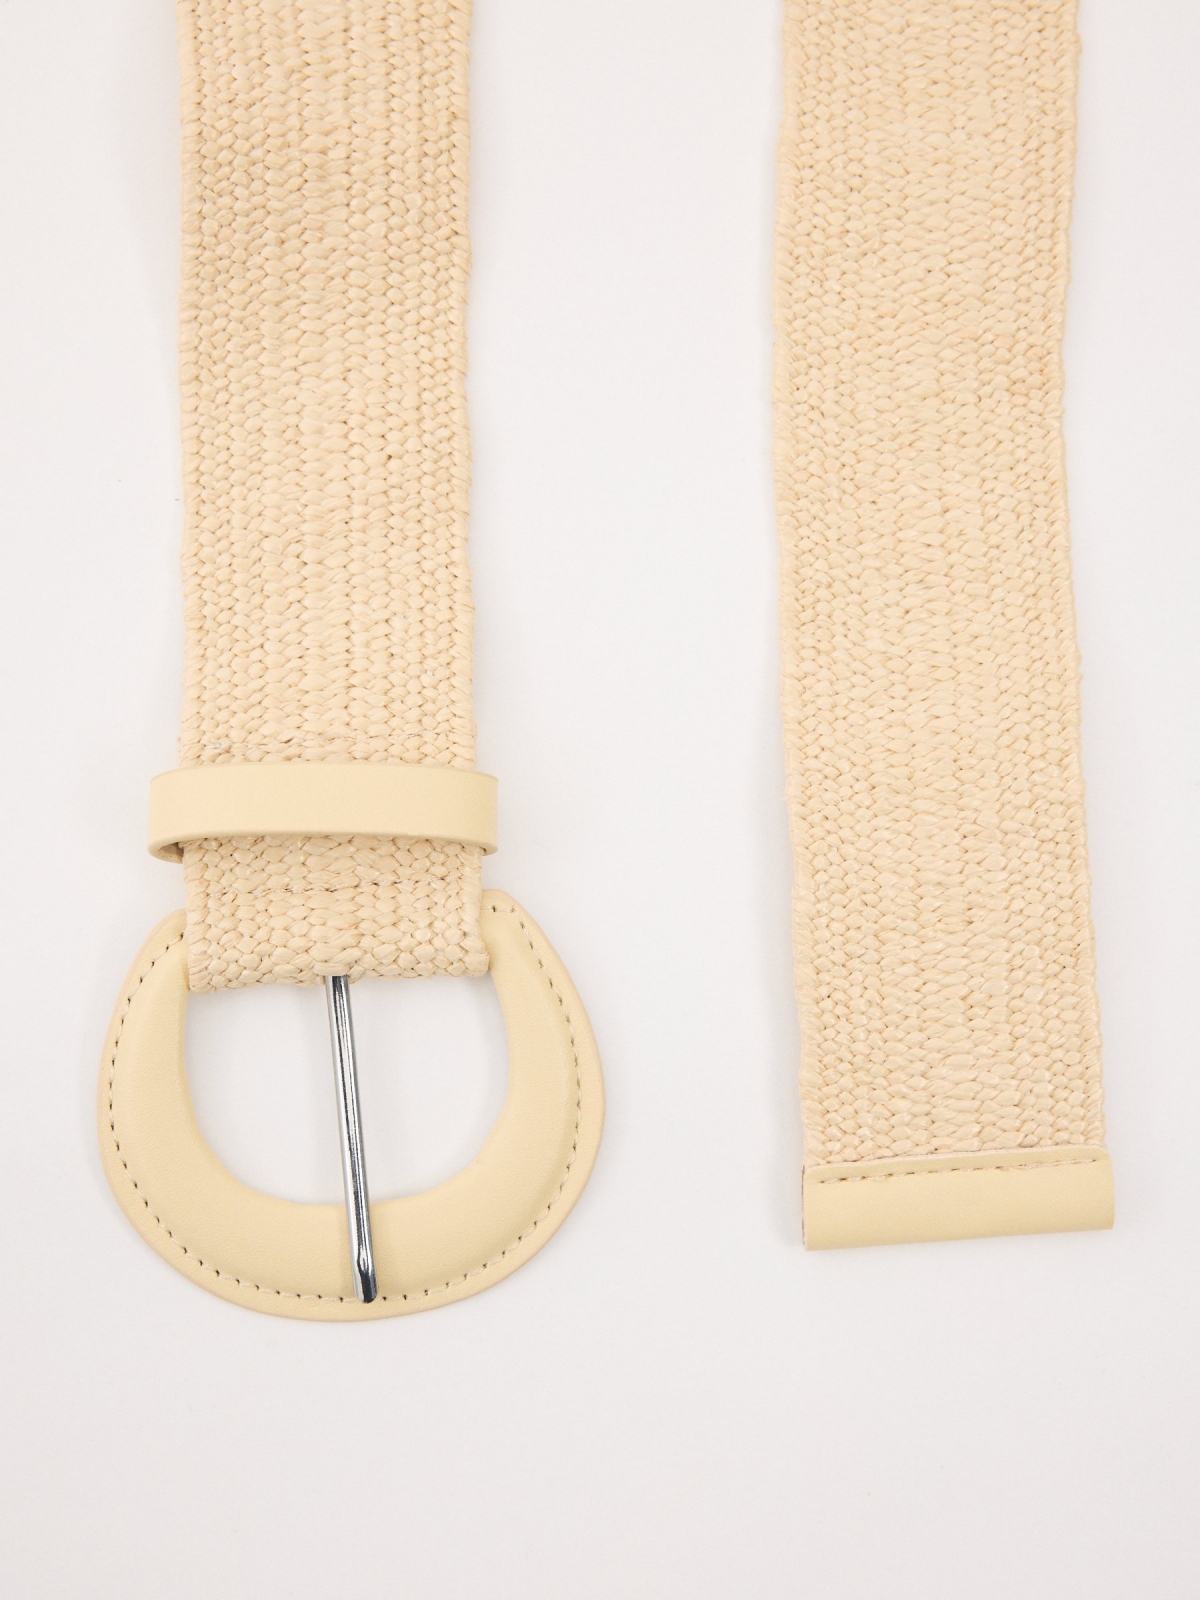 Combined elastic belt raw detail view